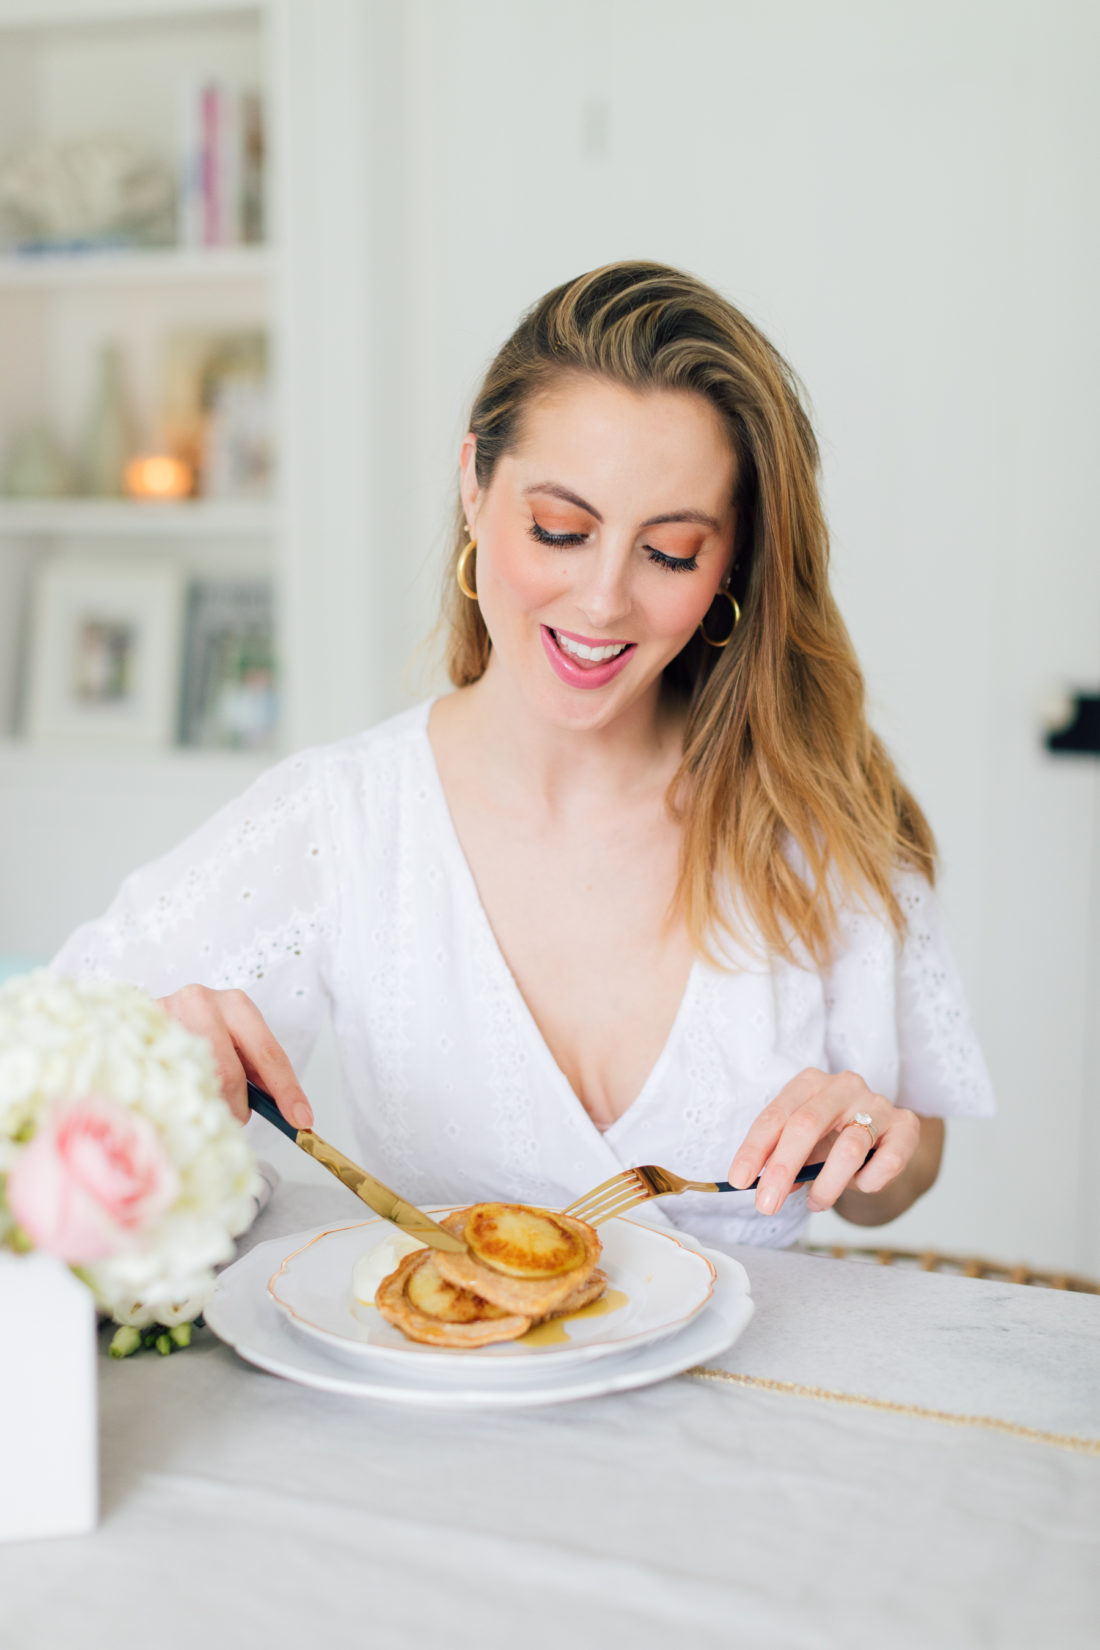 Eva Amurri Martino of Happily Eva After shares her recipe for Glow Pancakes for Mother's Day Brunch